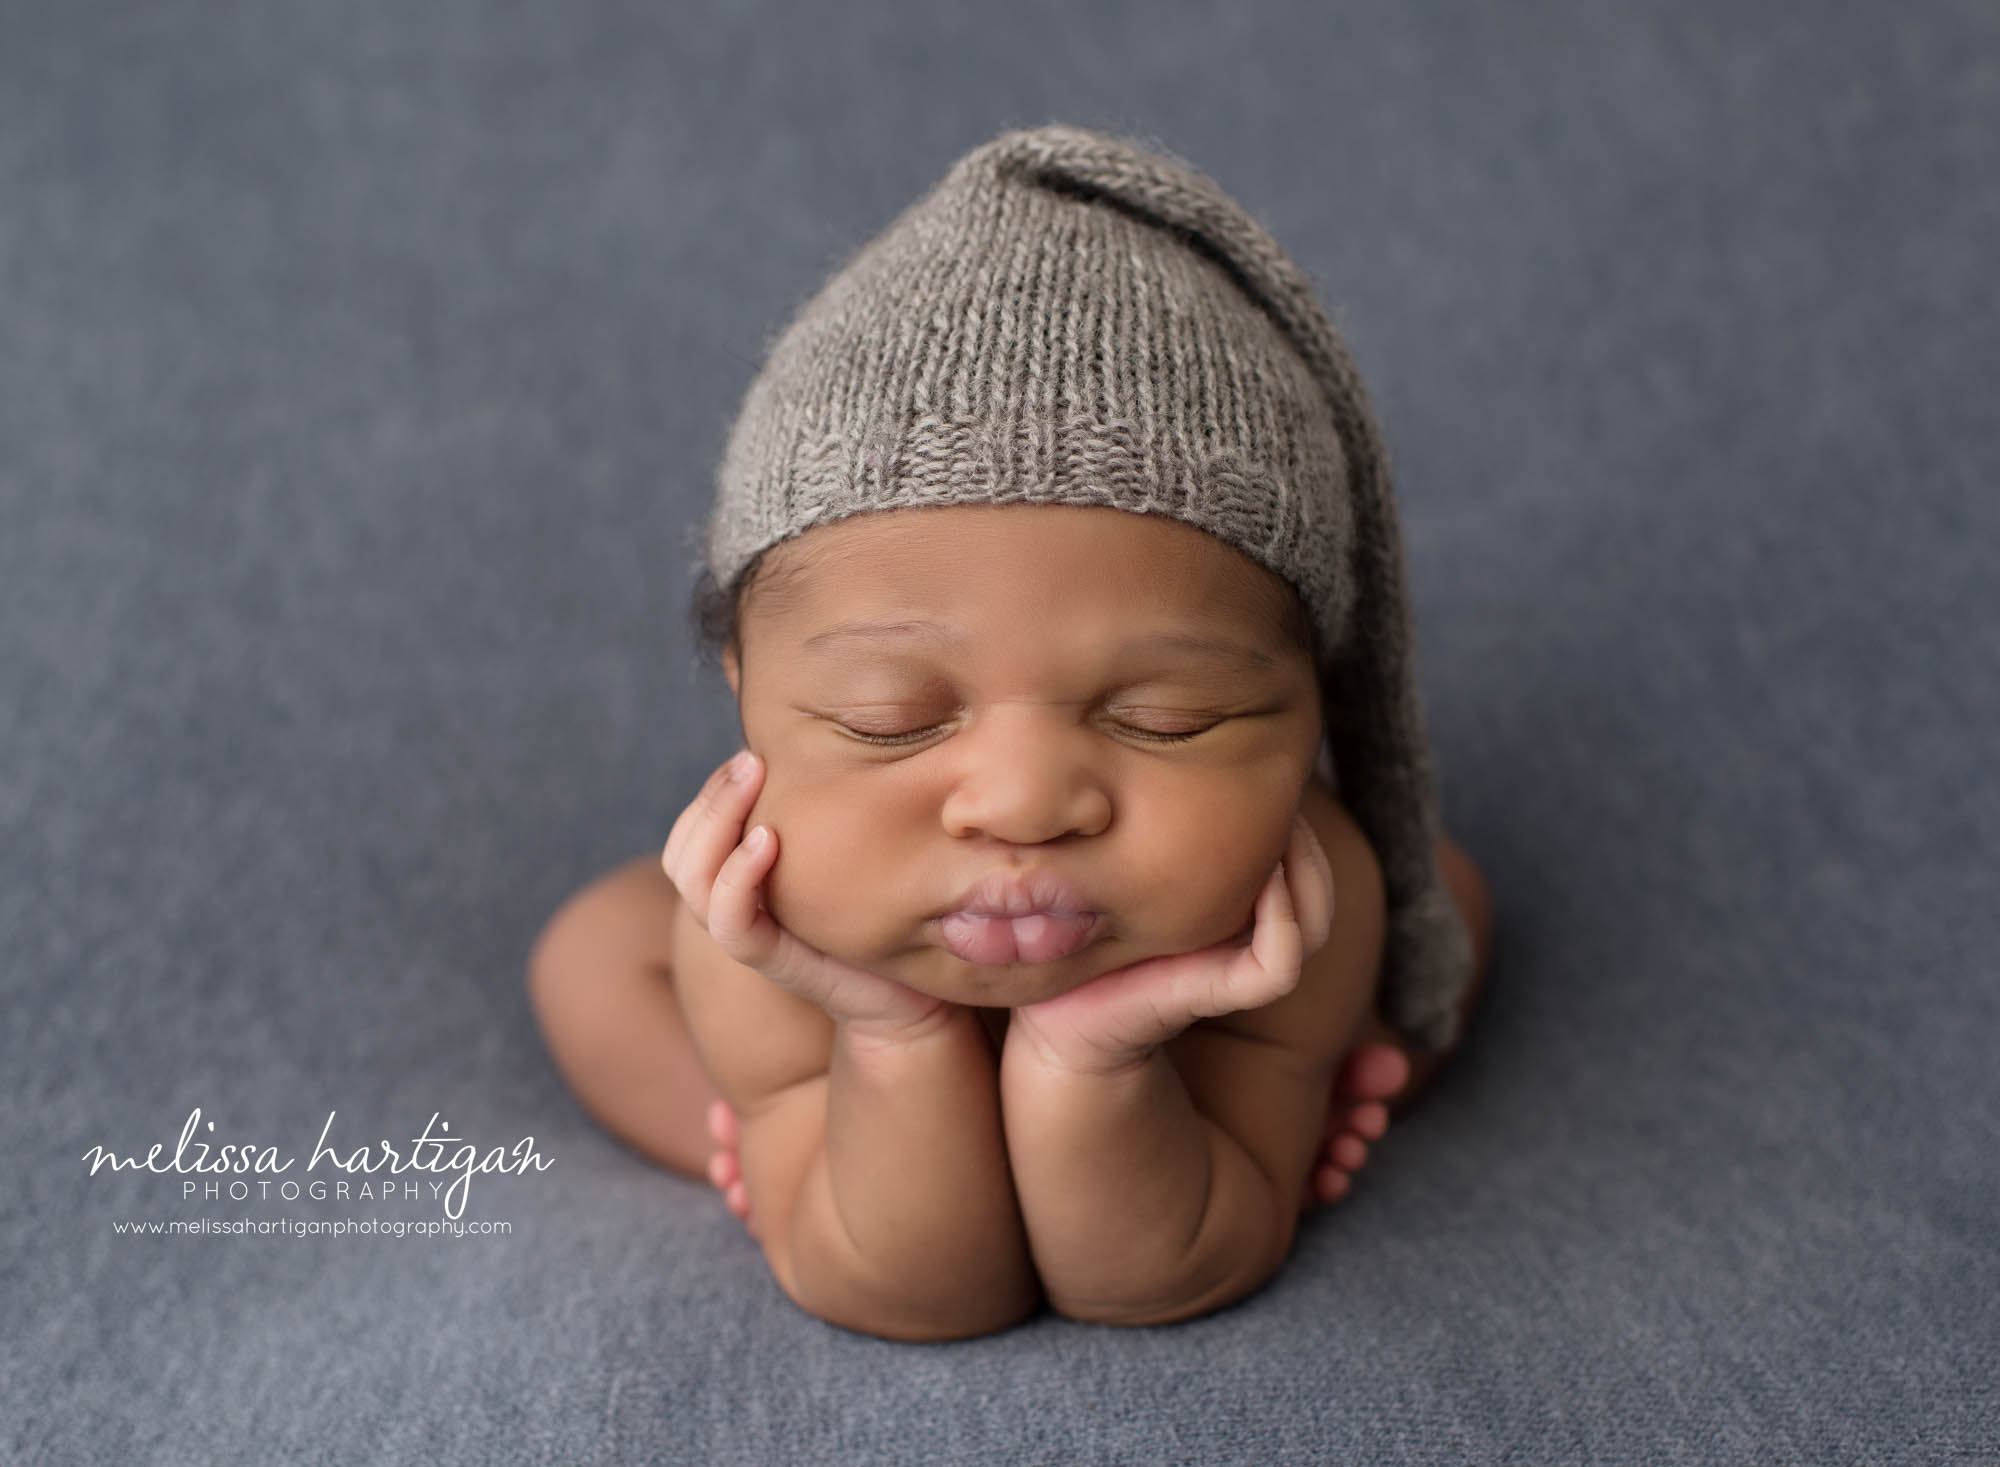 newborn baby boy posed froggy pose with puckered lips on blue backdrop wearing gray knitted sleepy cap